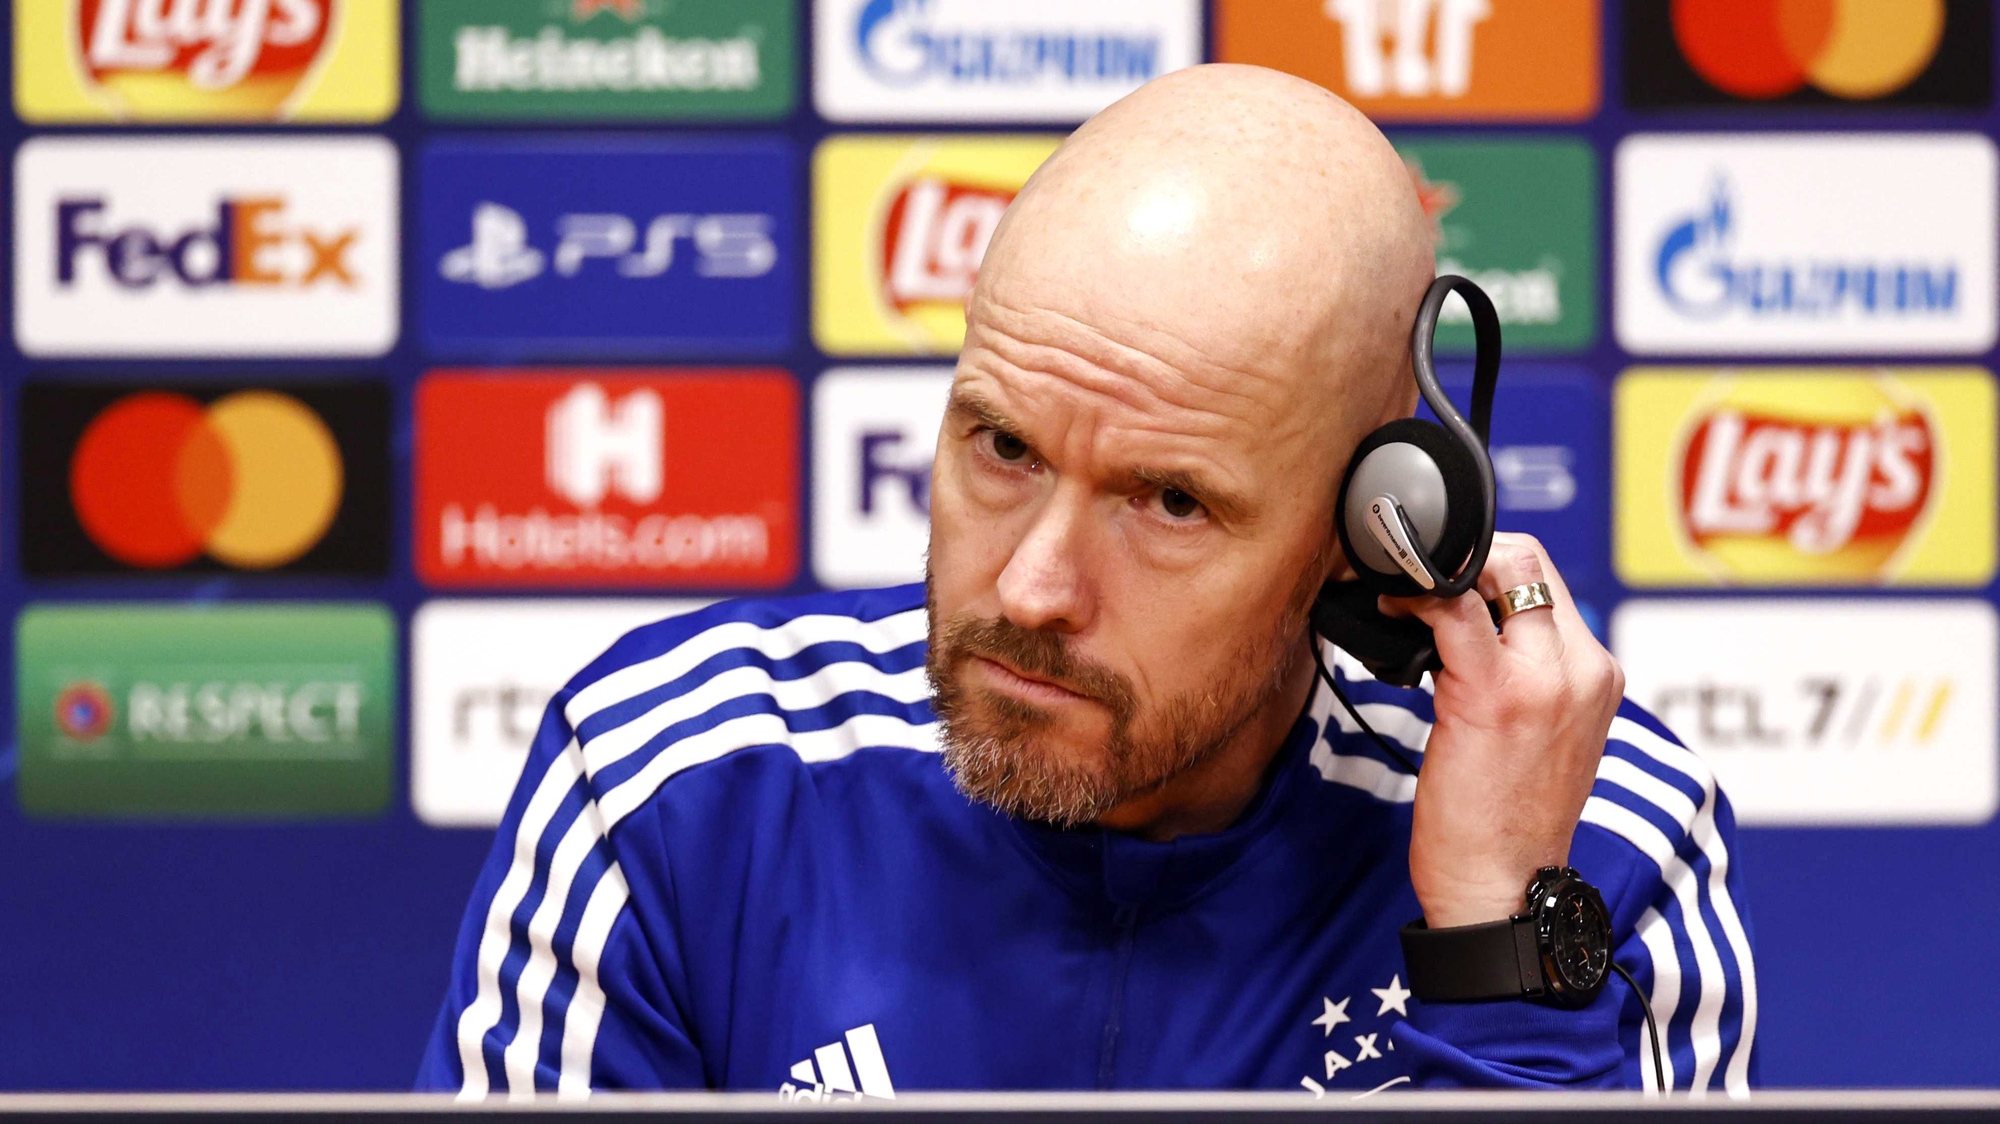 epa09625737 Ajax&#039;s coach Erik ten Hag attends a press conference at the Johan Cruijff ArenA in Amsterdam, Netherlands, 06 December 2021. Ajax will face Sporting FC in their UEFA Champions League group stage match on 07 December 2021.  EPA/MAURICE VAN STEEN